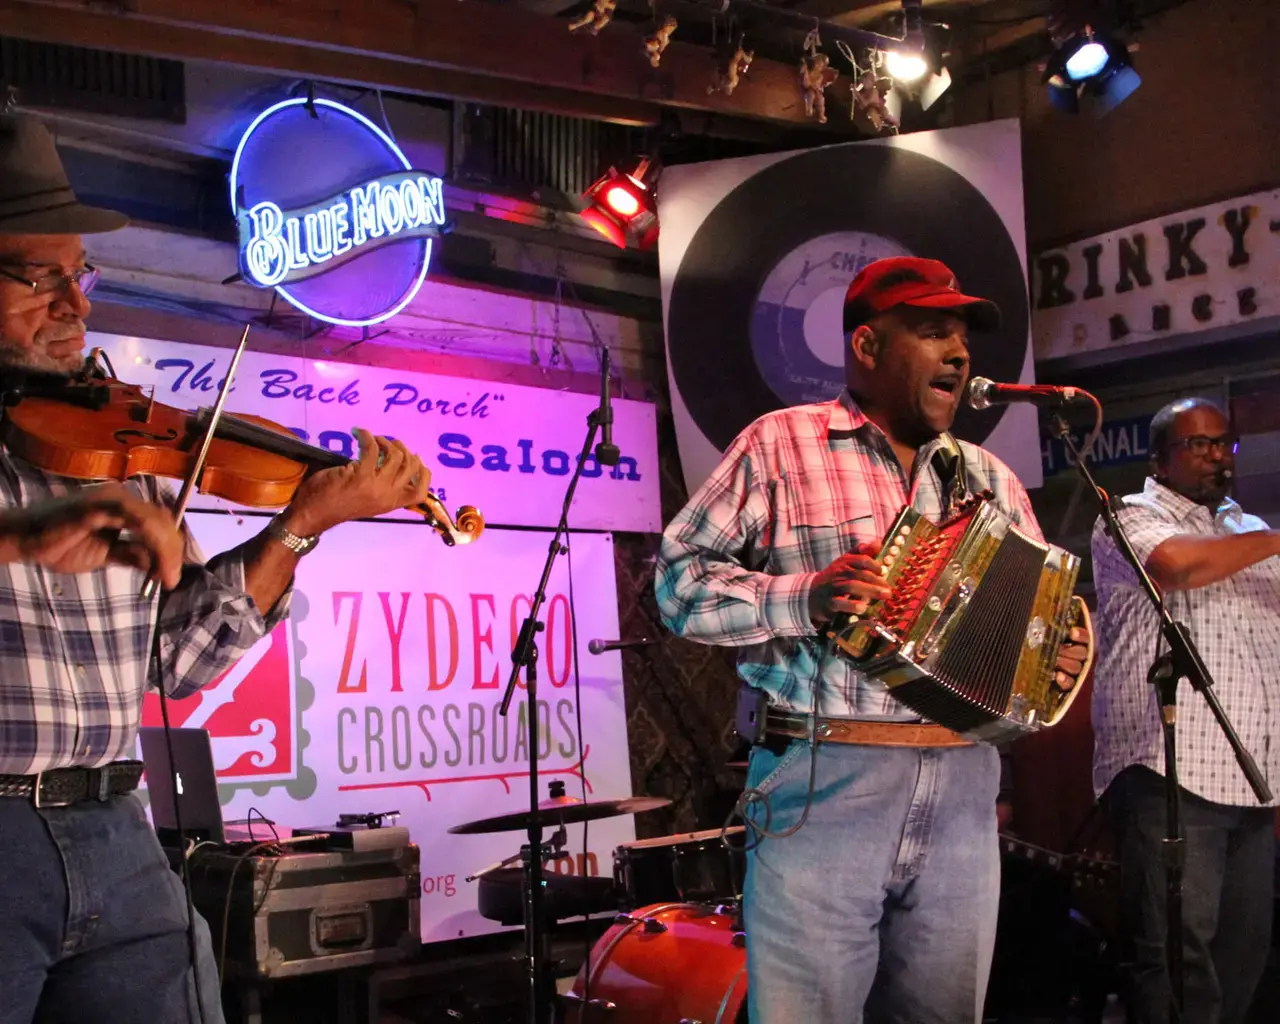 Creole United performs at a Zydeco Crossroads event for WXPN. Photo by John Vettese.